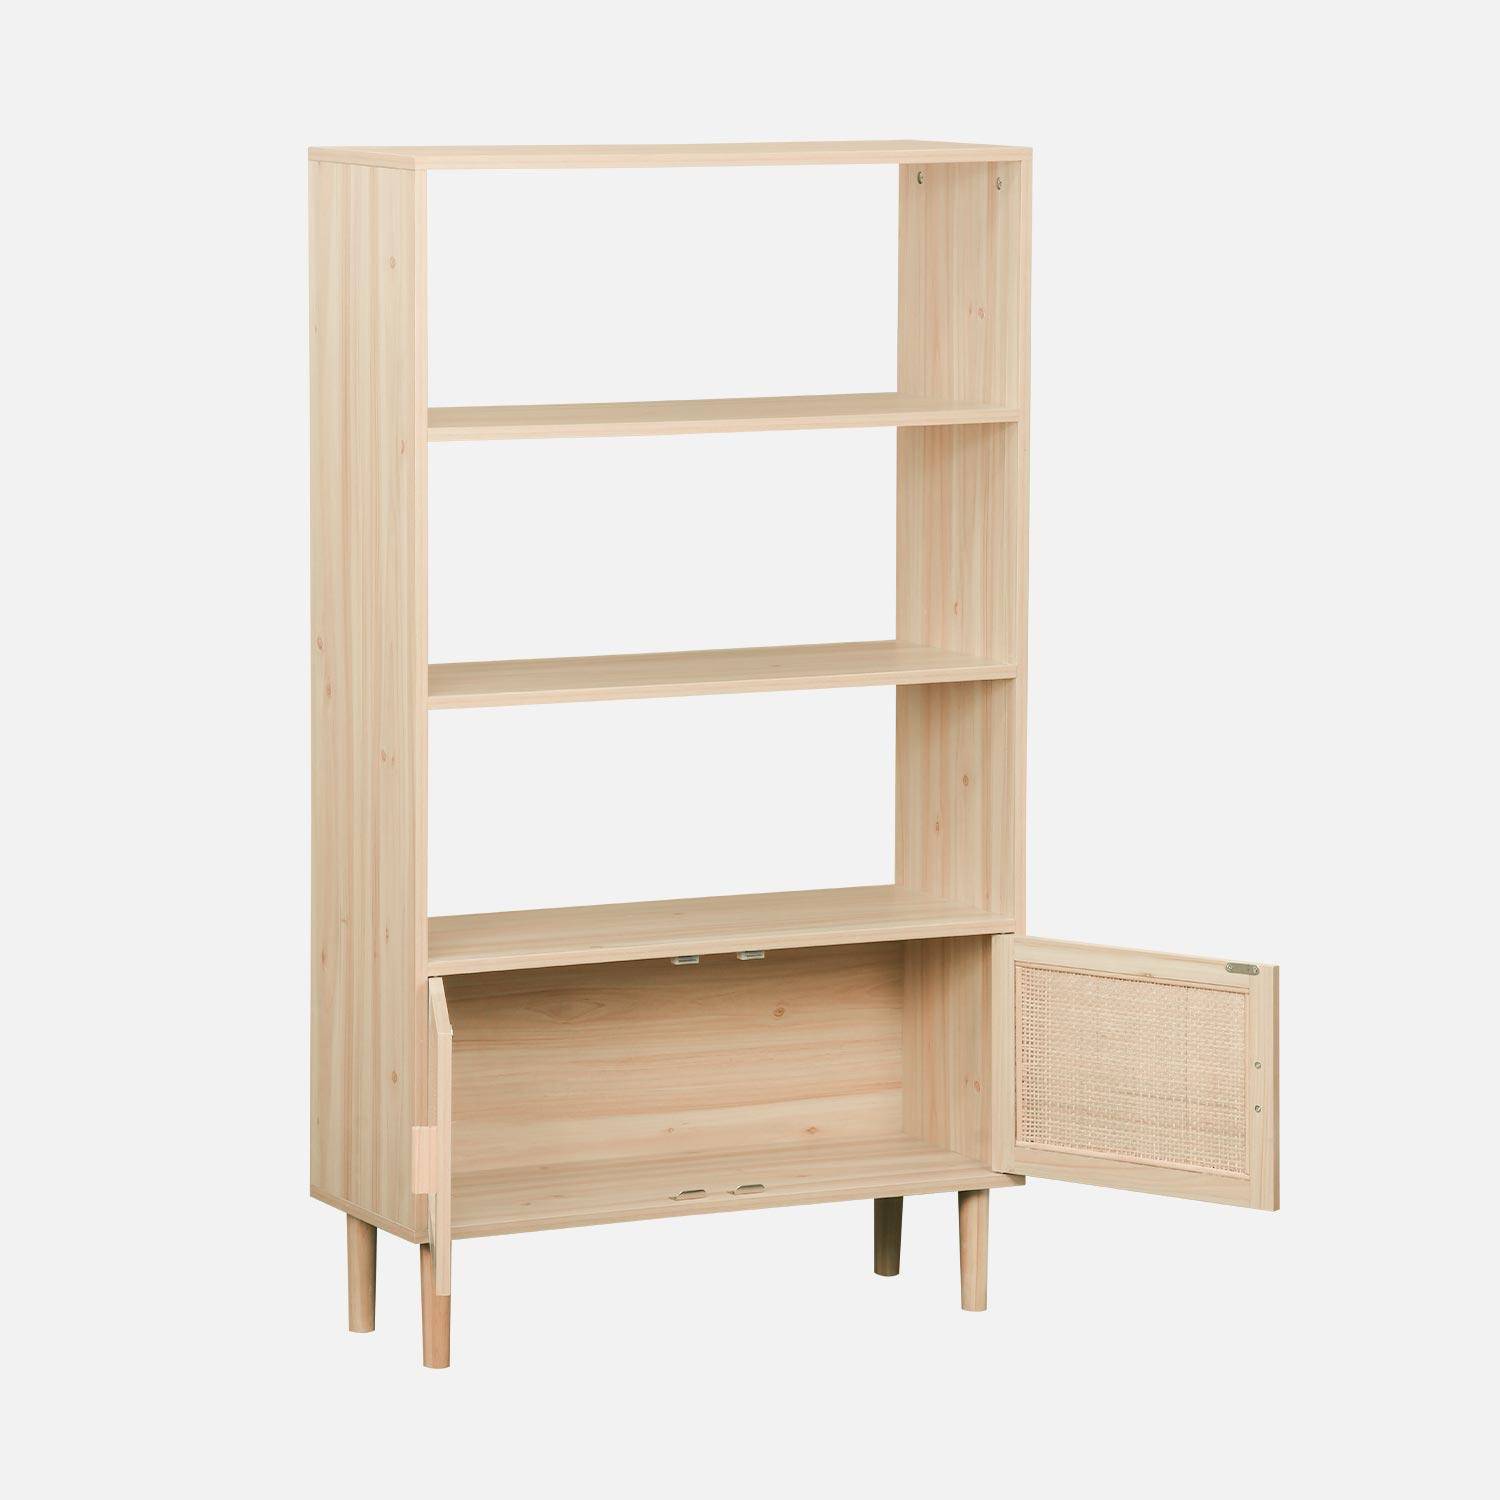 Woven rattan bookcase with storage cupboard, 3 shelves, 2 doors, 80x30x140cm - Camargue - Natural Photo5